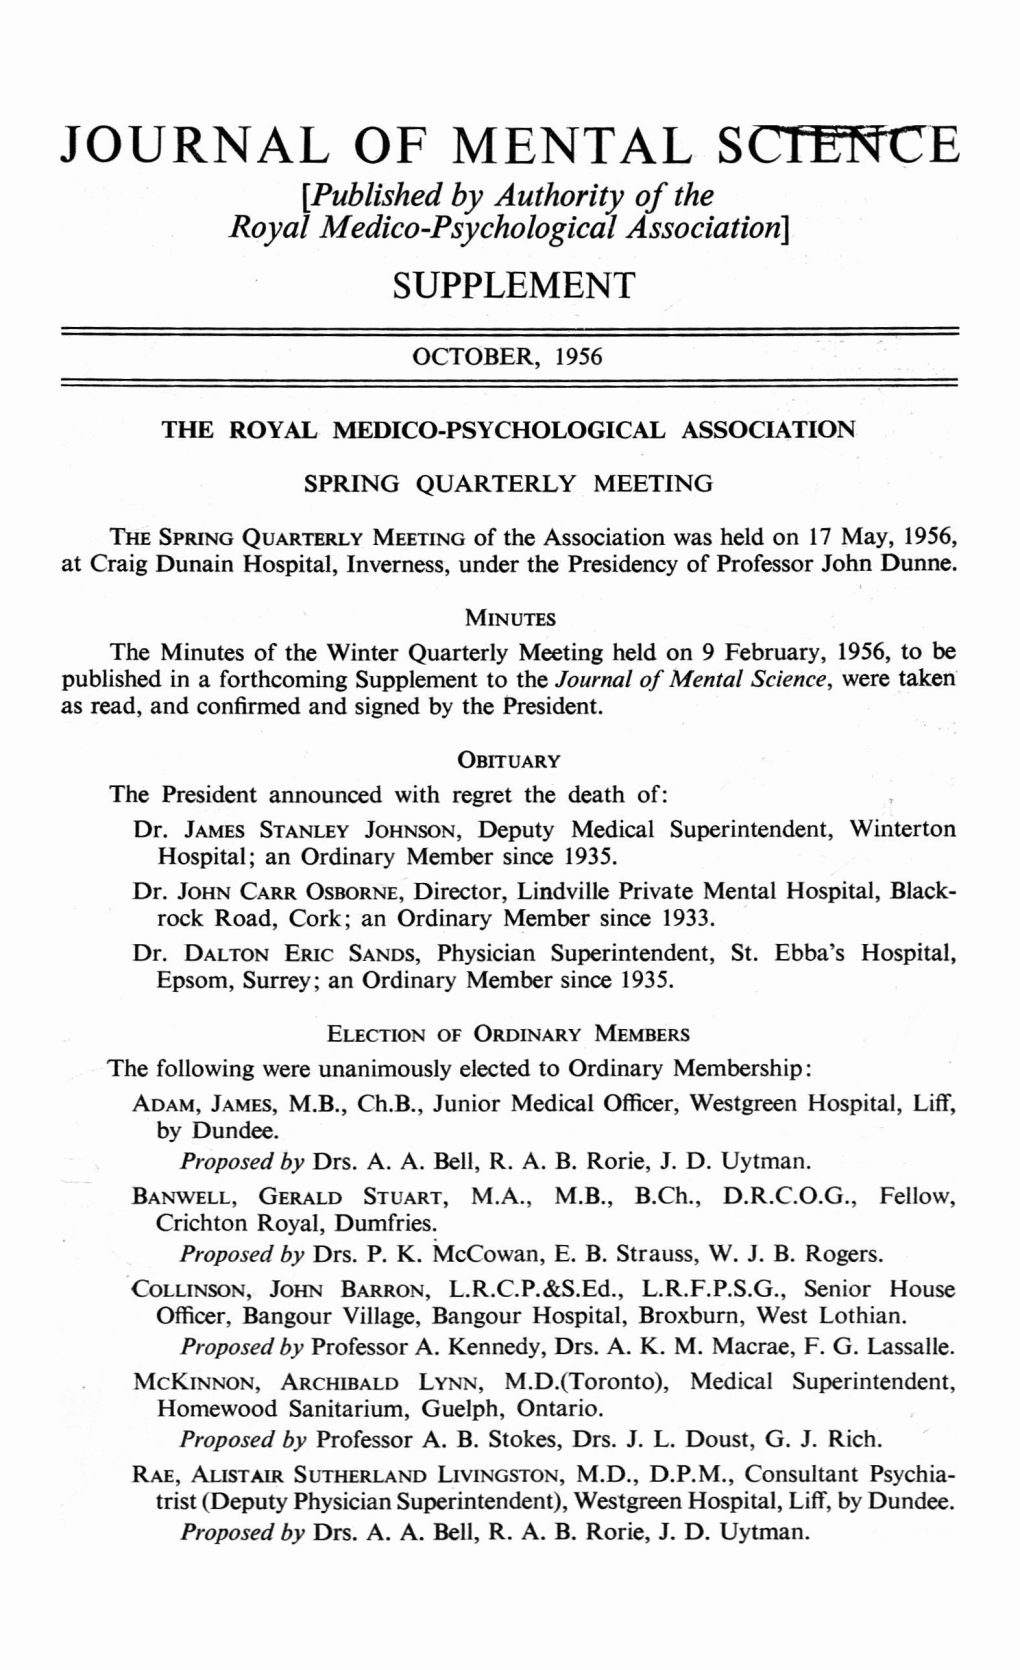 JOURNAL of MENTAL SCTH^CE [Published by Authority of the Royal Medico-Psychological Association] SUPPLEMENT OCTOBER, 1956